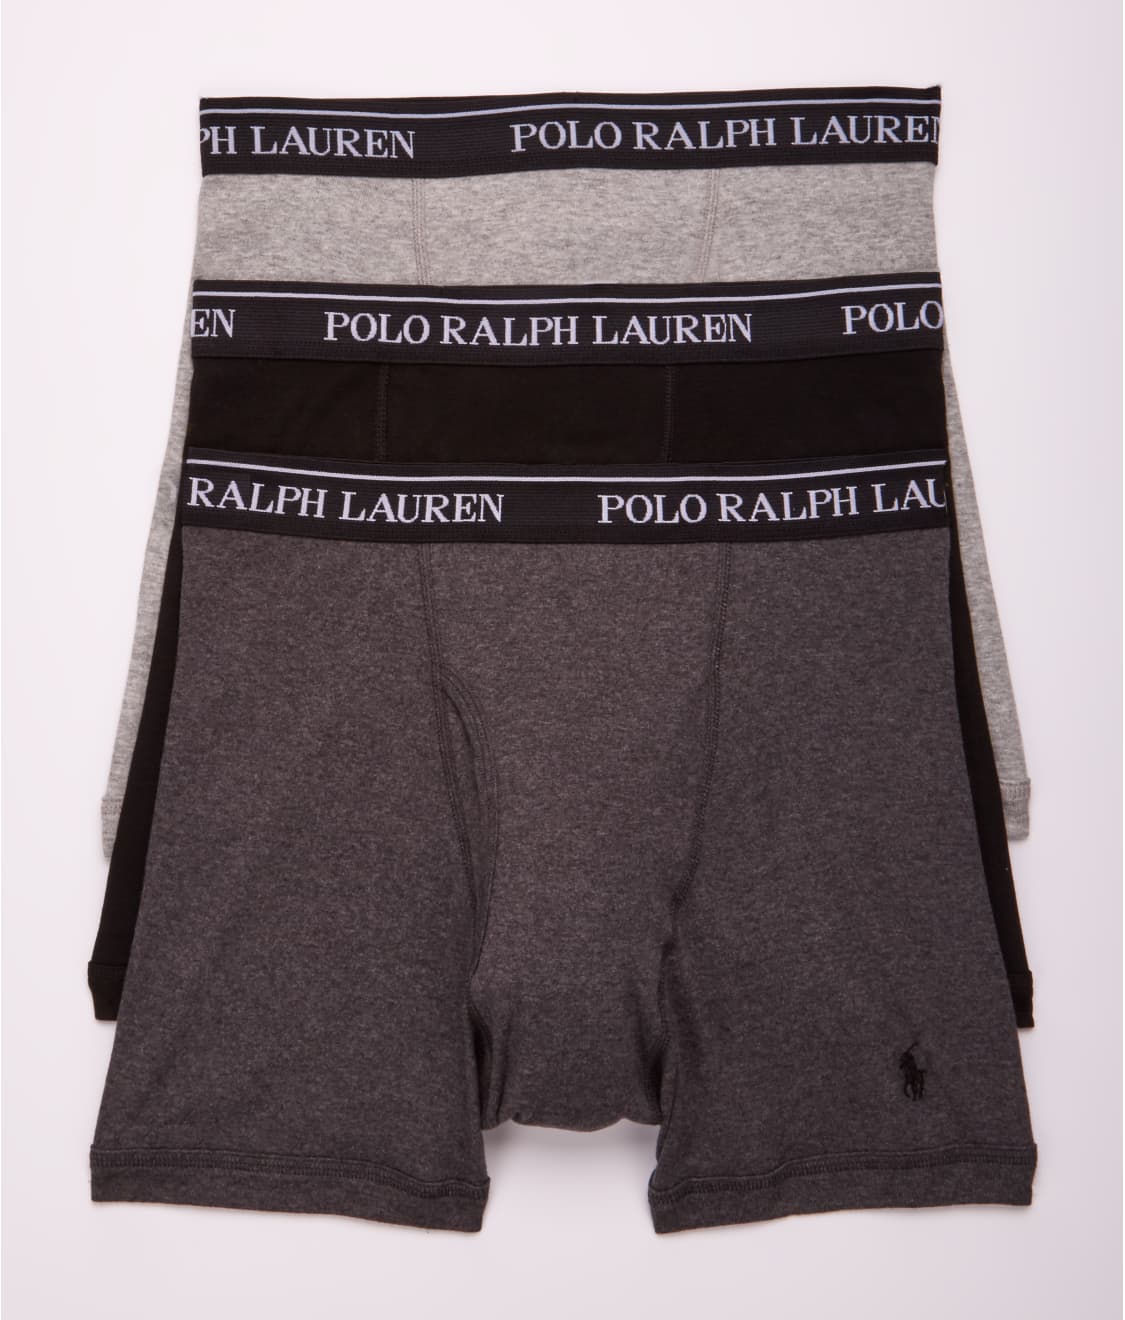 Polo Ralph Lauren: Classic Fit Cotton Wicking Boxer Brief 3-Pack NCBBP3